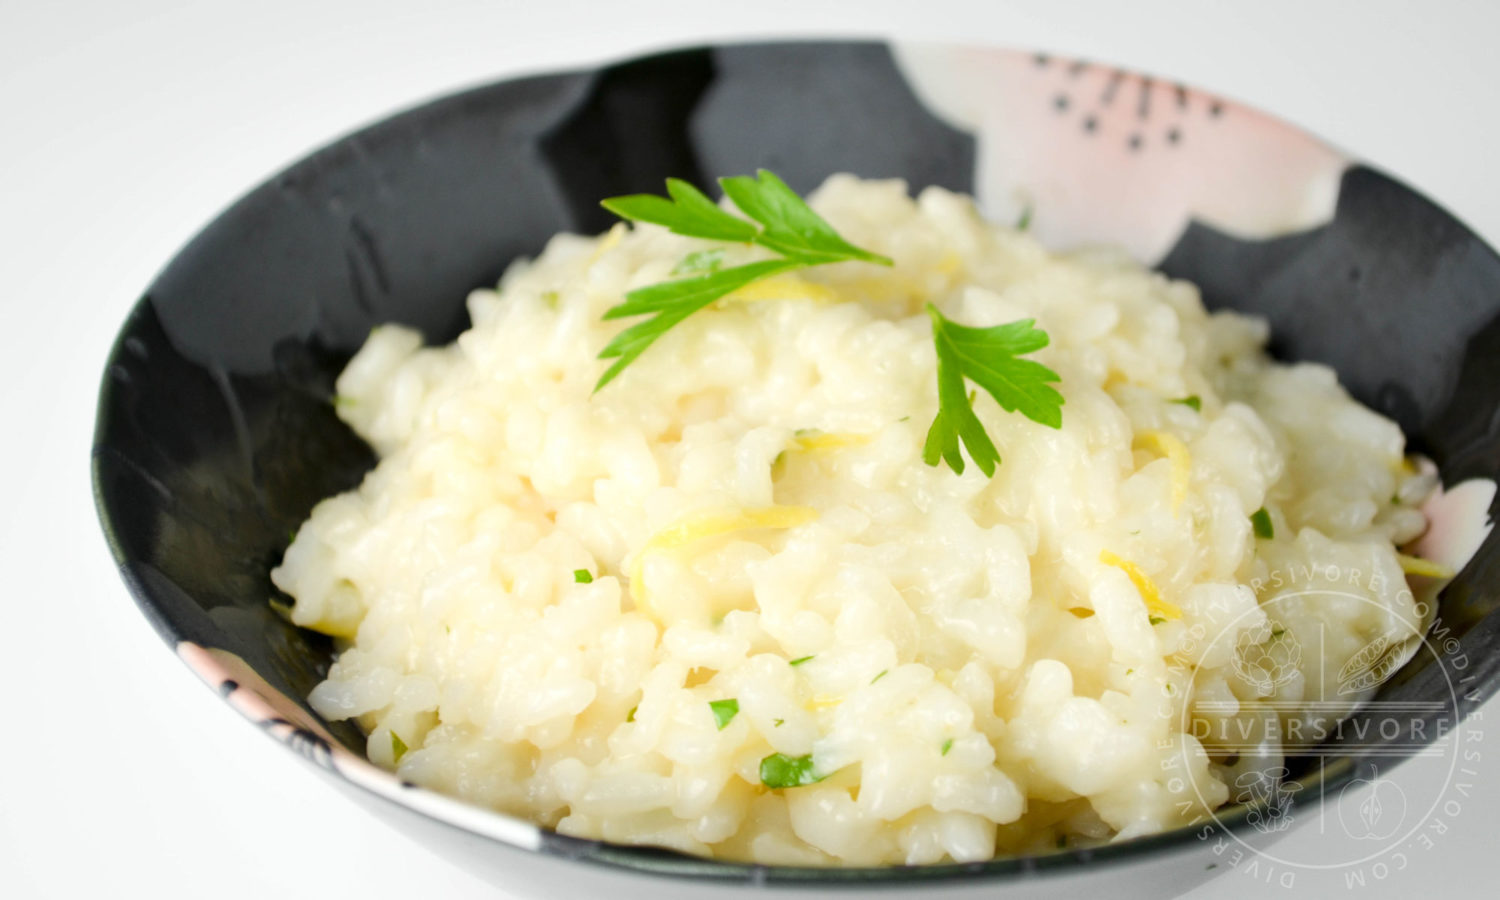 Japanese lemon herb risotto, made with sake in place of white wine and short grain Japanese rice -DJapanese lemon herb risotto, made with sake in place of white wine and short grain Japanese rice - Diversivore.com